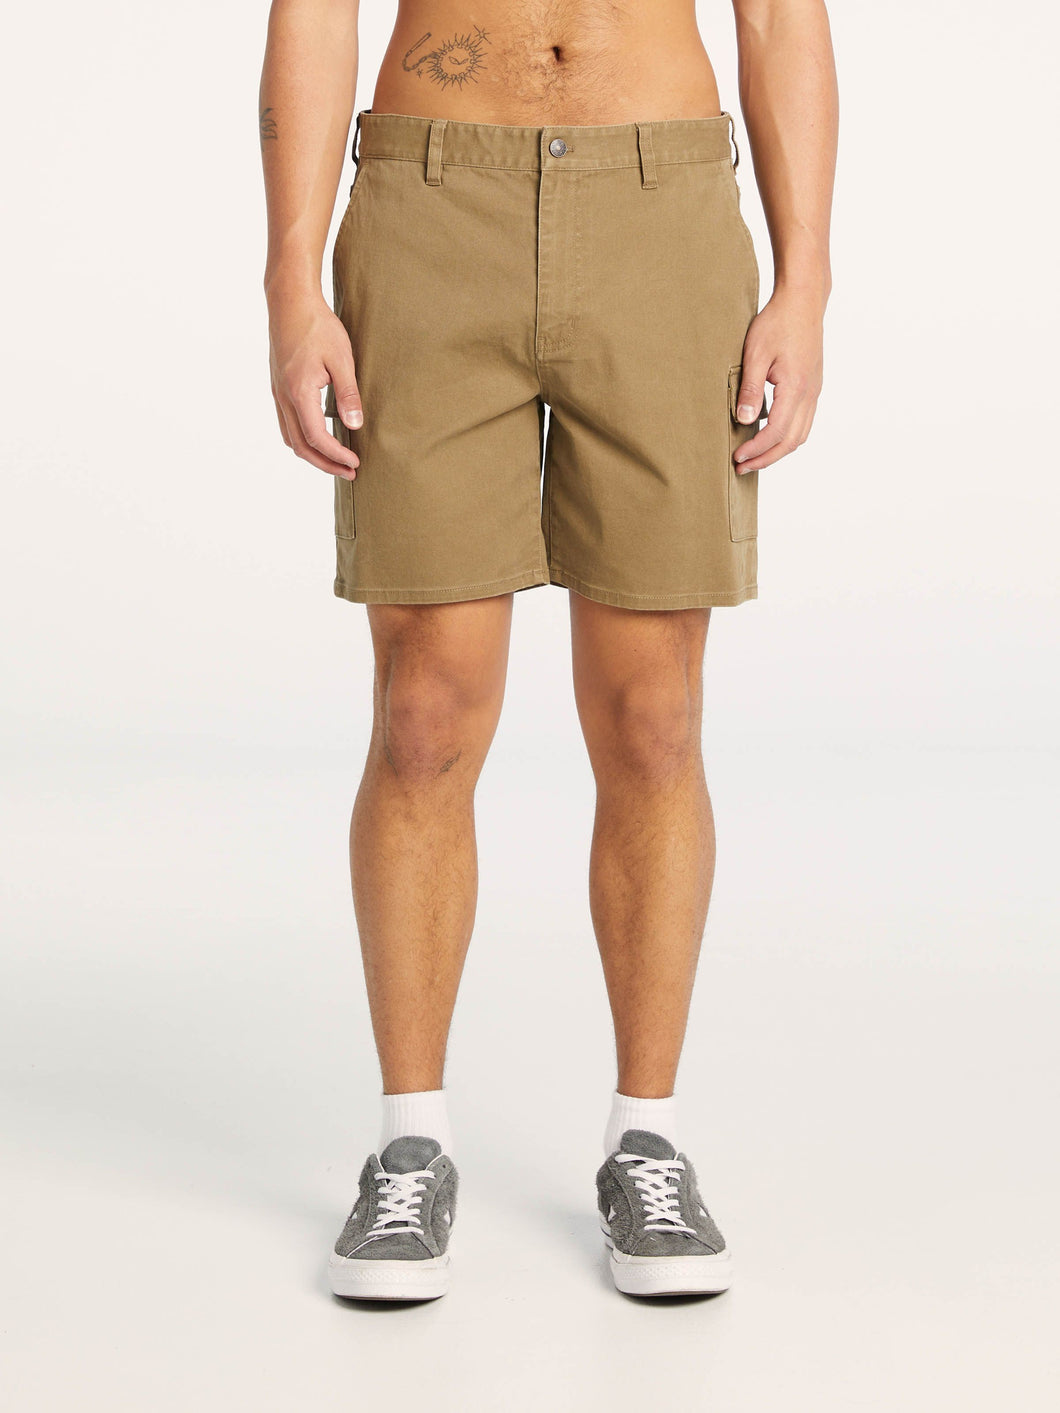 Riders By Lee R4 Cargo Short - Taupe